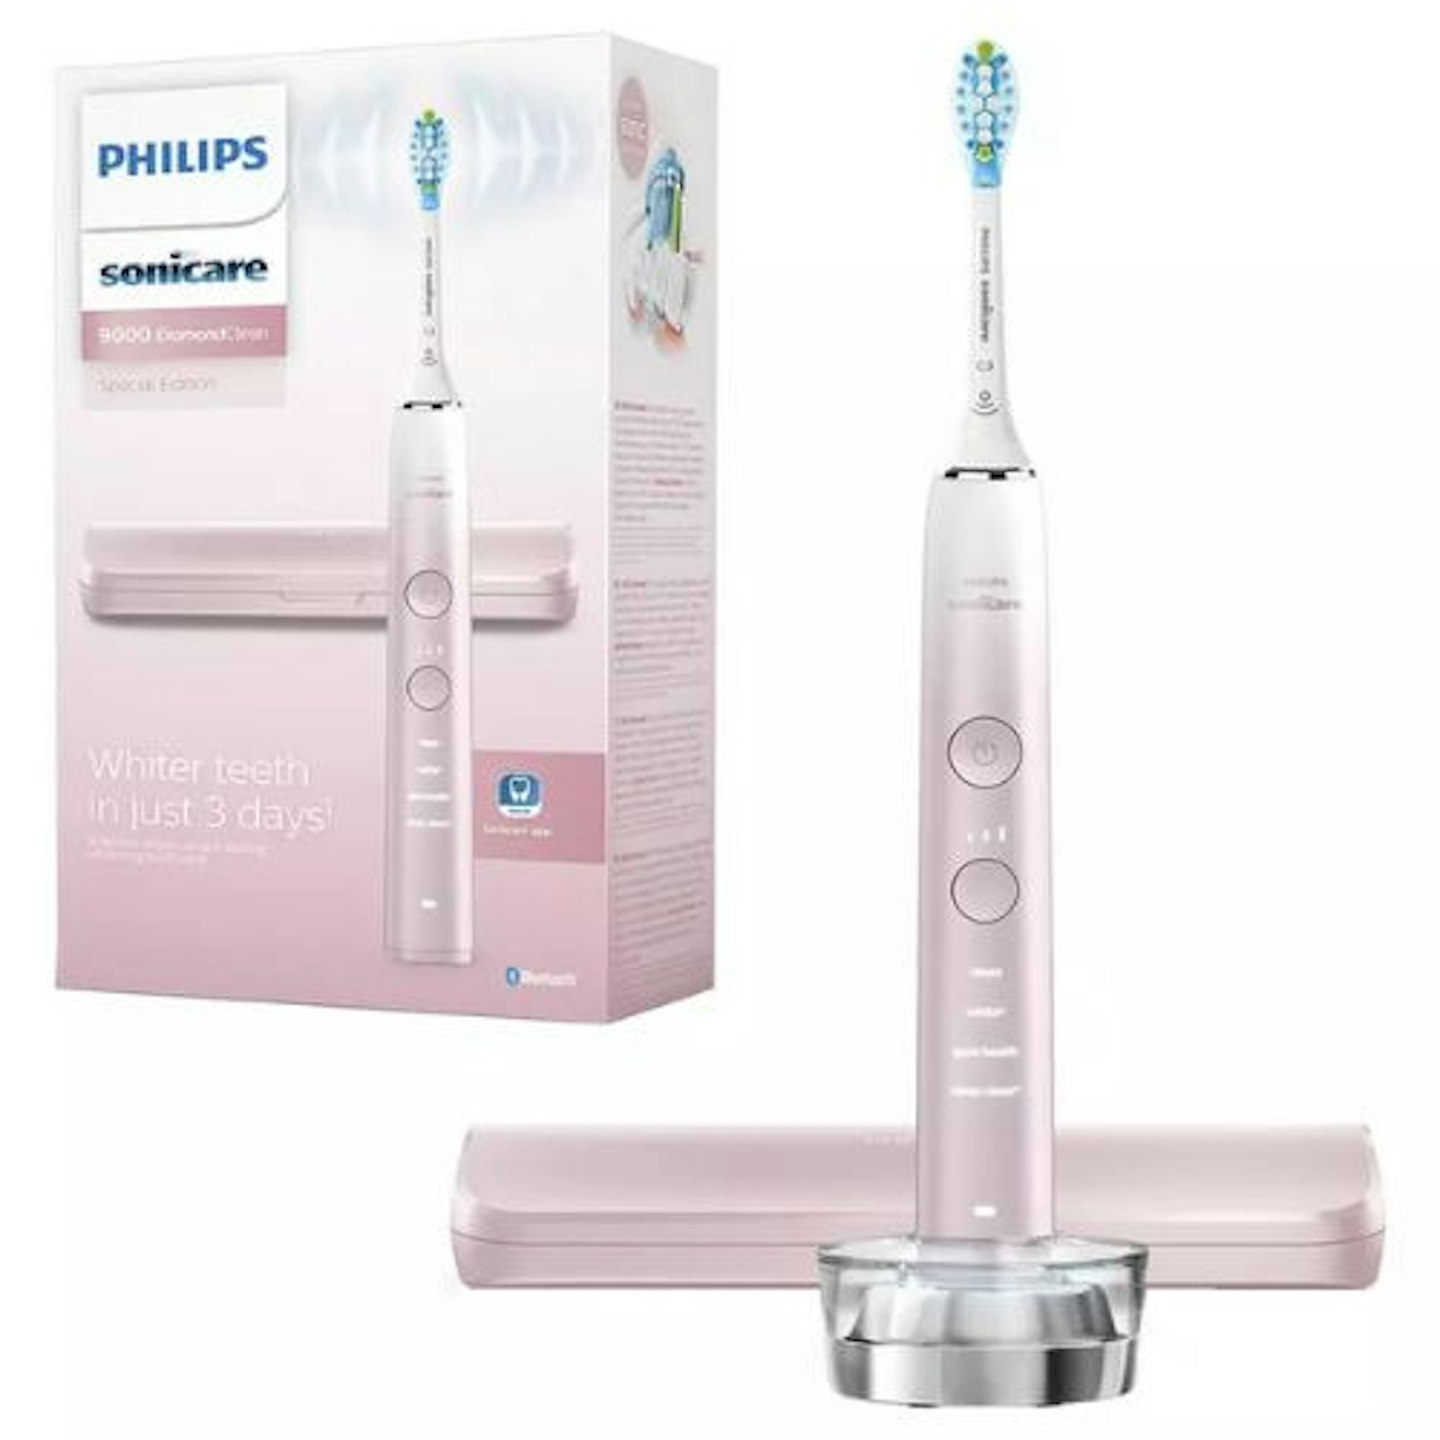 Philips Sonicare DiamondClean 9000 Electric Toothbrush Pink956/4891